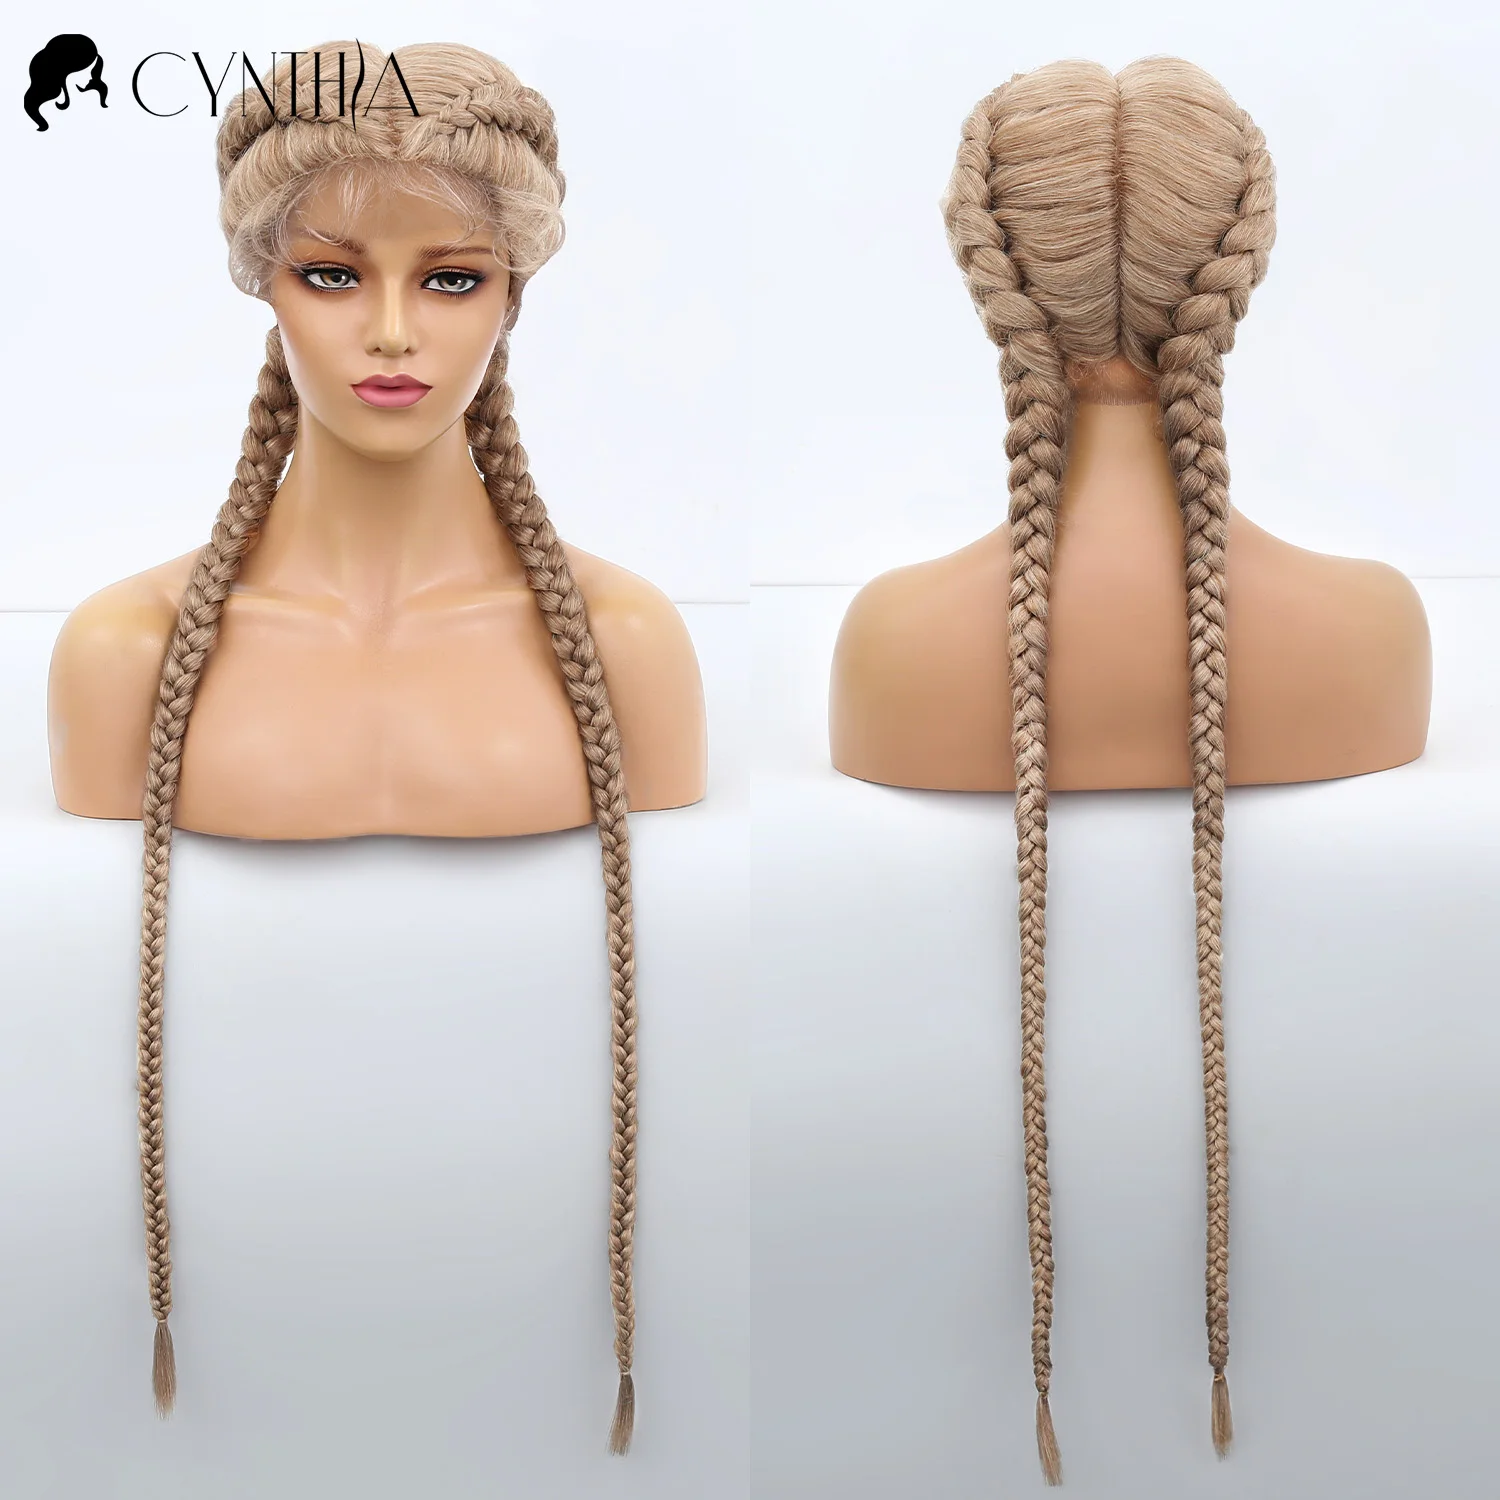 Braided Lace Front Wig Synthetic Wigs For Black Women Brown Ombre 36 Inch Long Dutch Twins Braids with Baby Hair 360 Lace Fronta